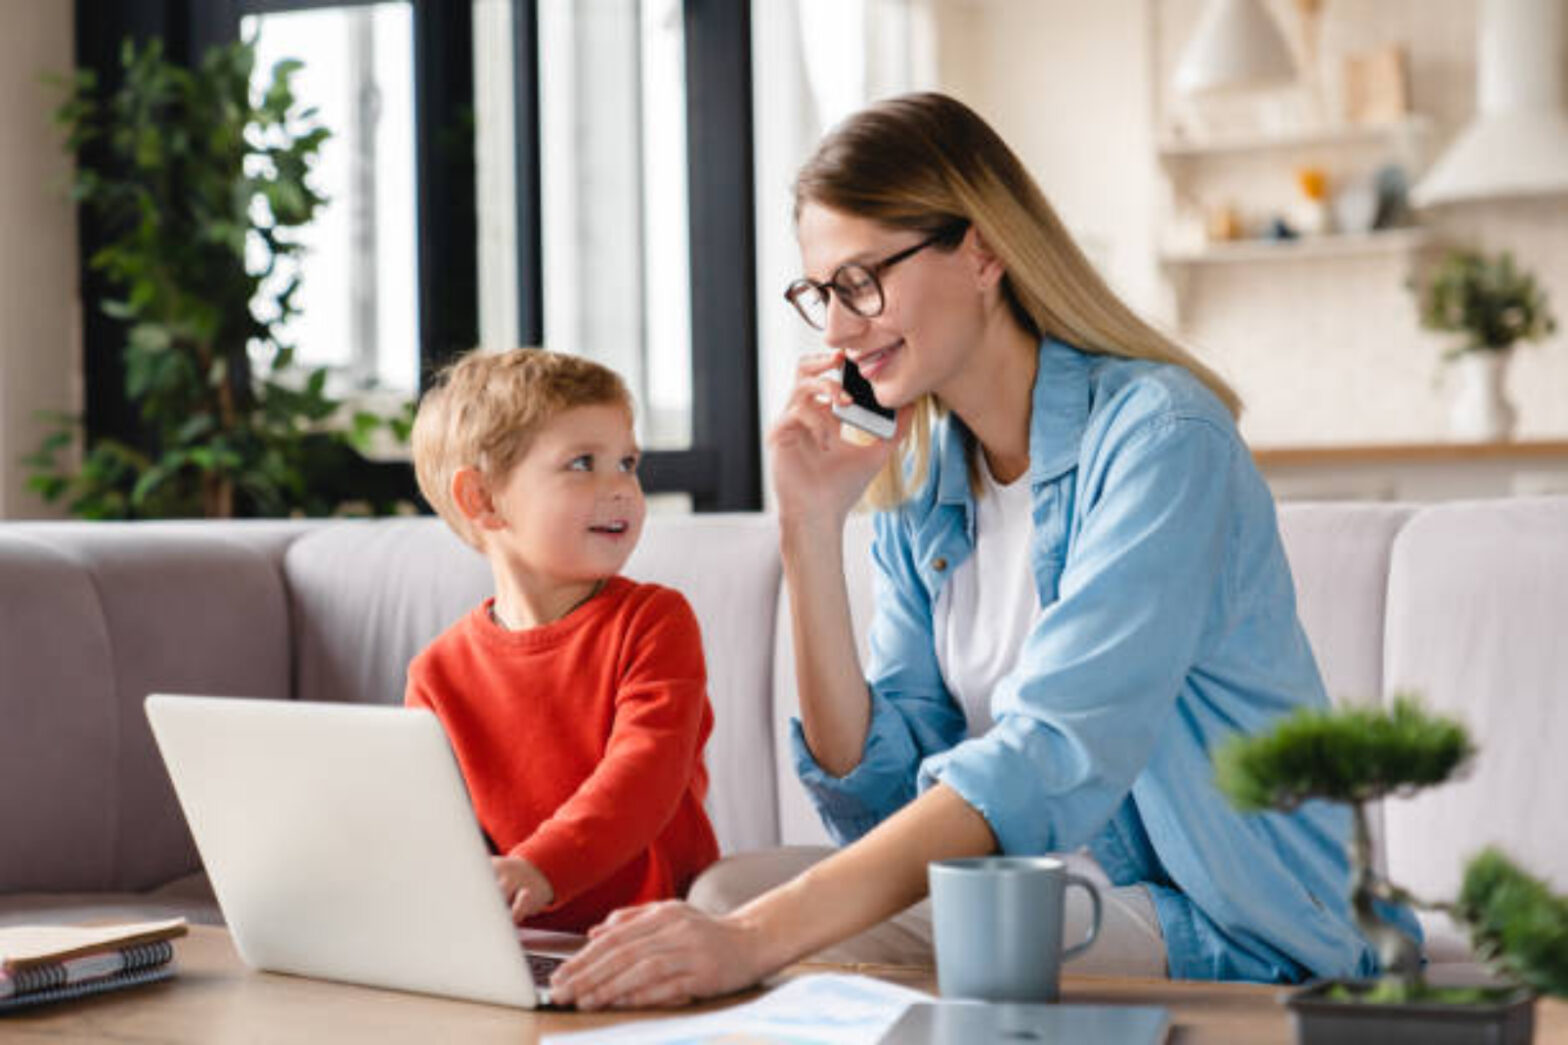 Nanny Rates 2023: How Much Should I Pay a Nanny?